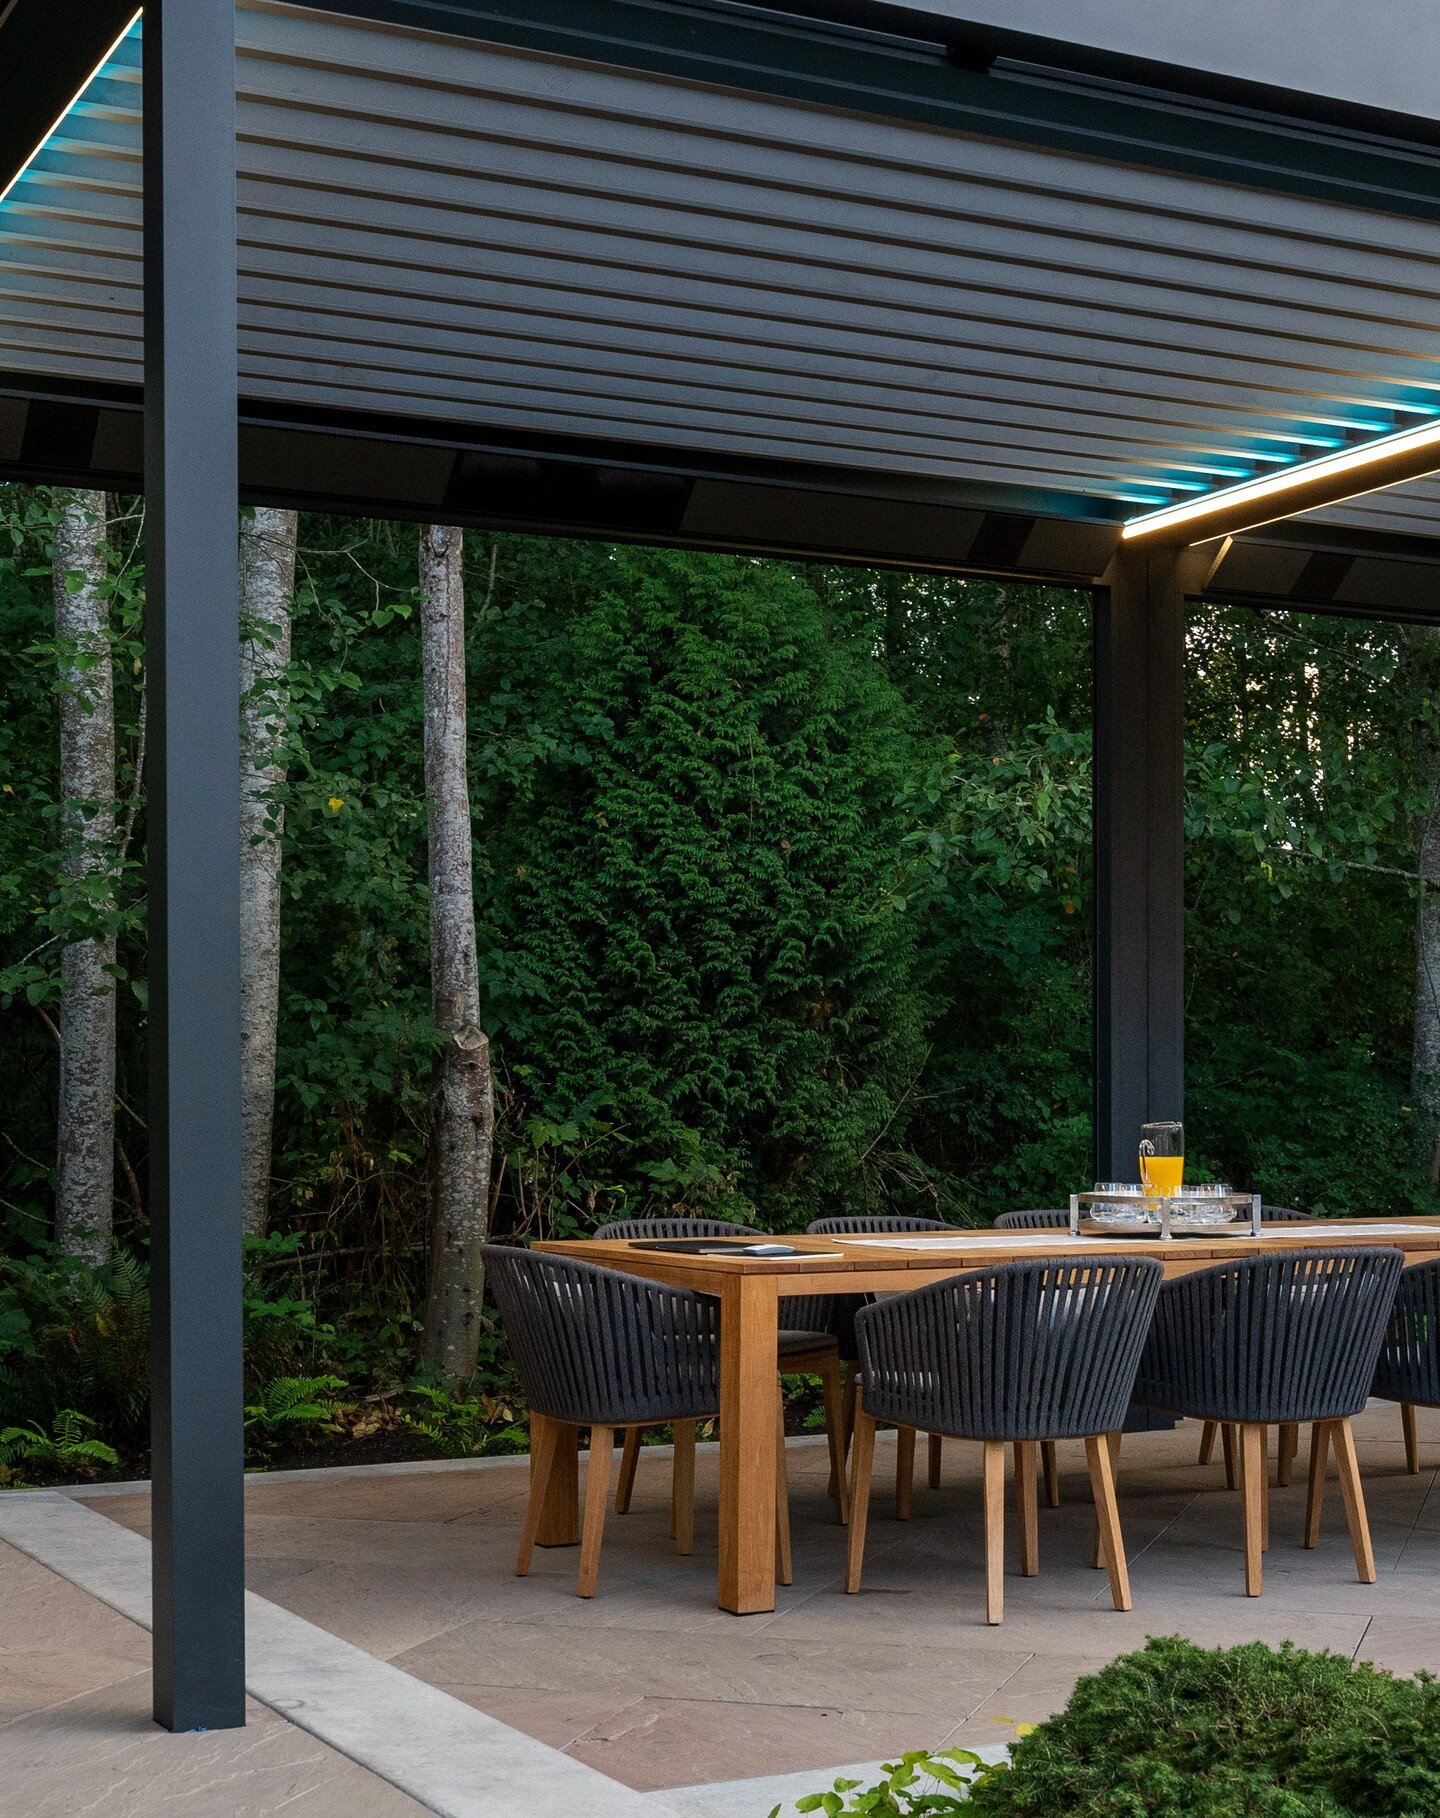 We are proud to announce that our Elgin Creek project has been selected to represent Canada for outstanding outdoor living designs in Renson&rsquo;s worldwide reference book! Check out our project on pages 48 and 49! 

https://issuu.com/renson.ventil